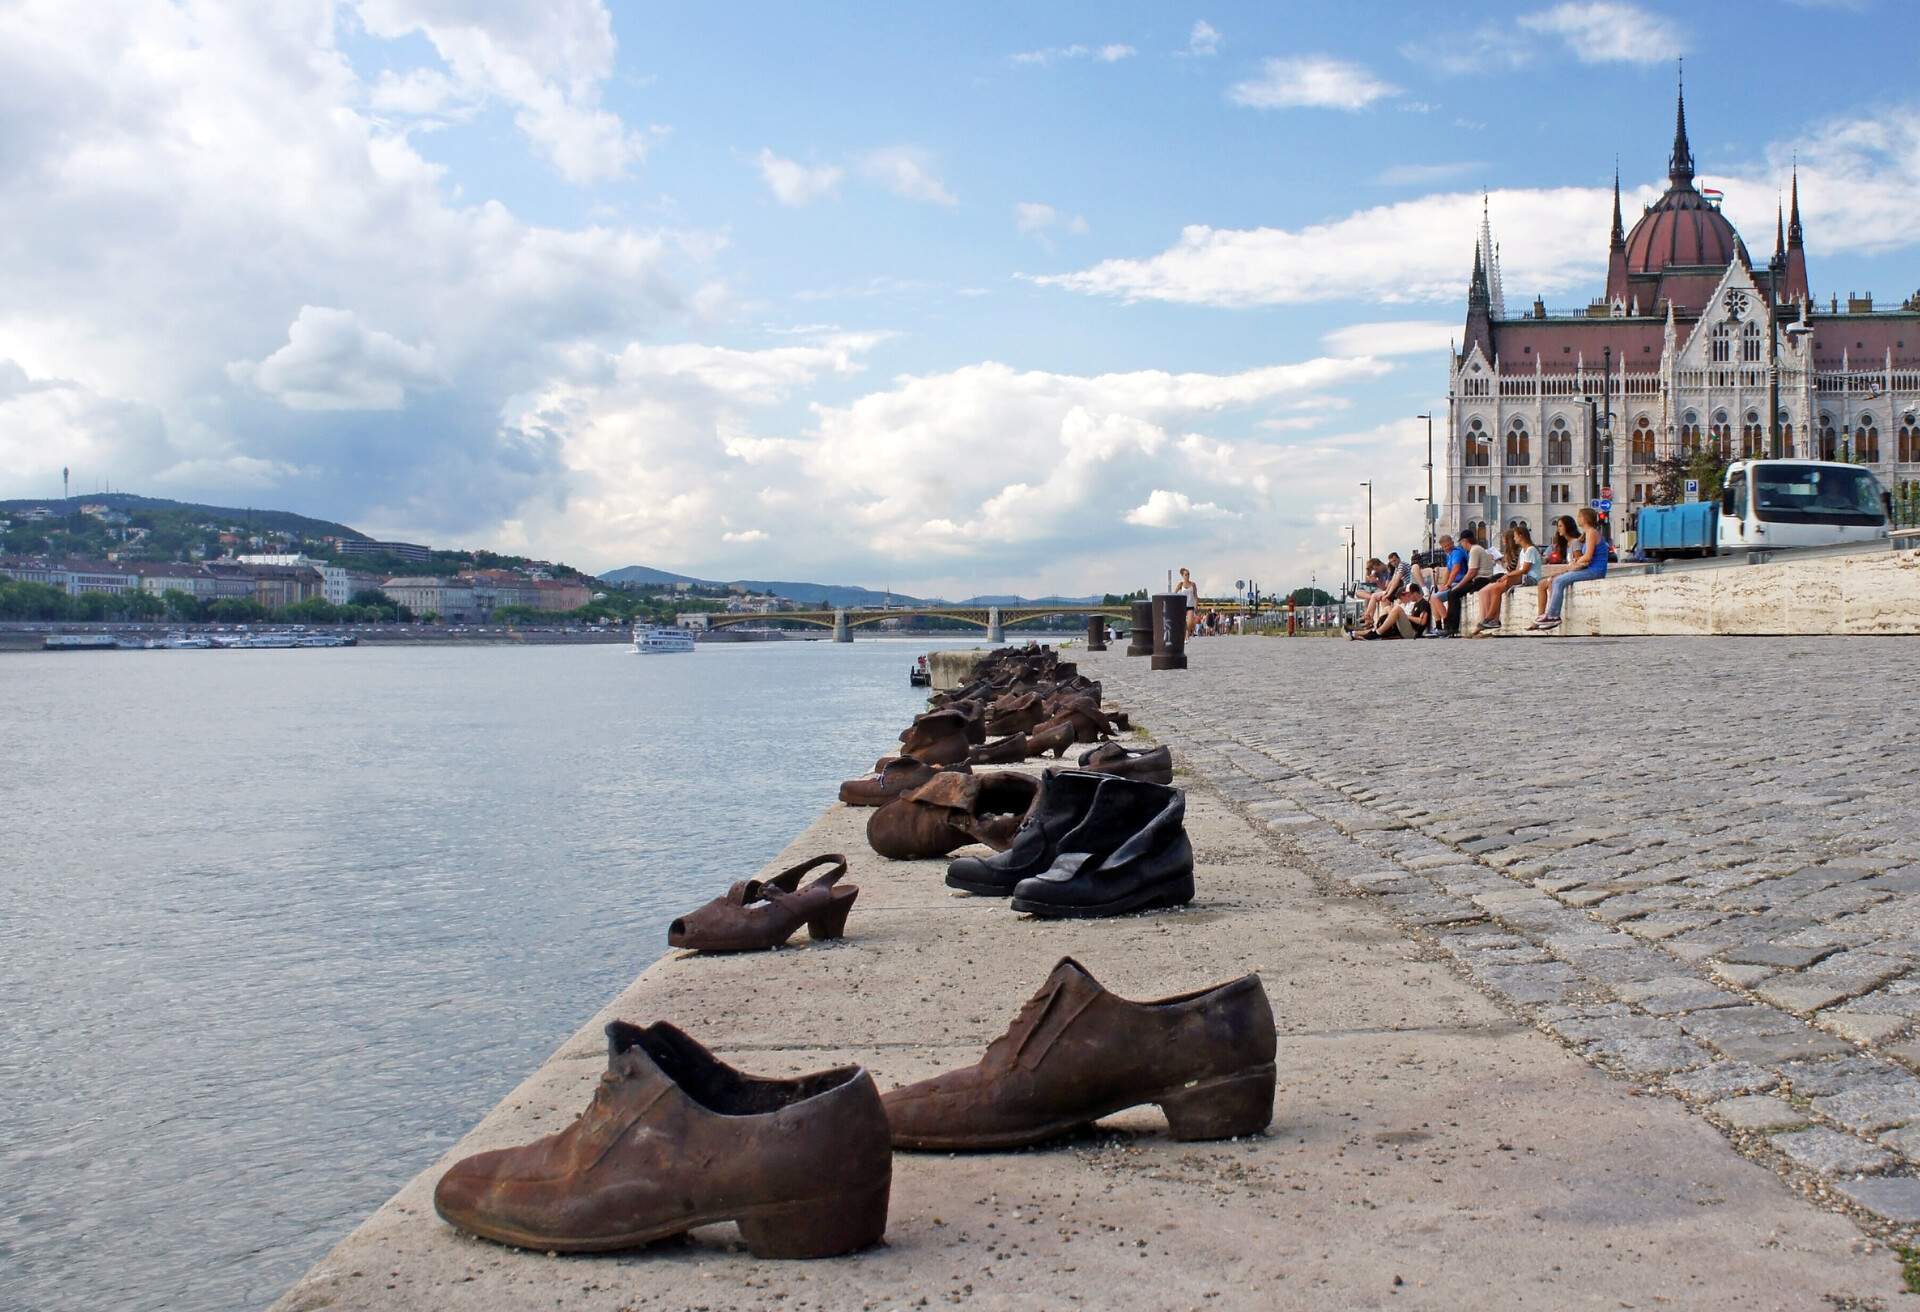 Shoes on the Danube Bank near Parlament, Budapest, Hungary